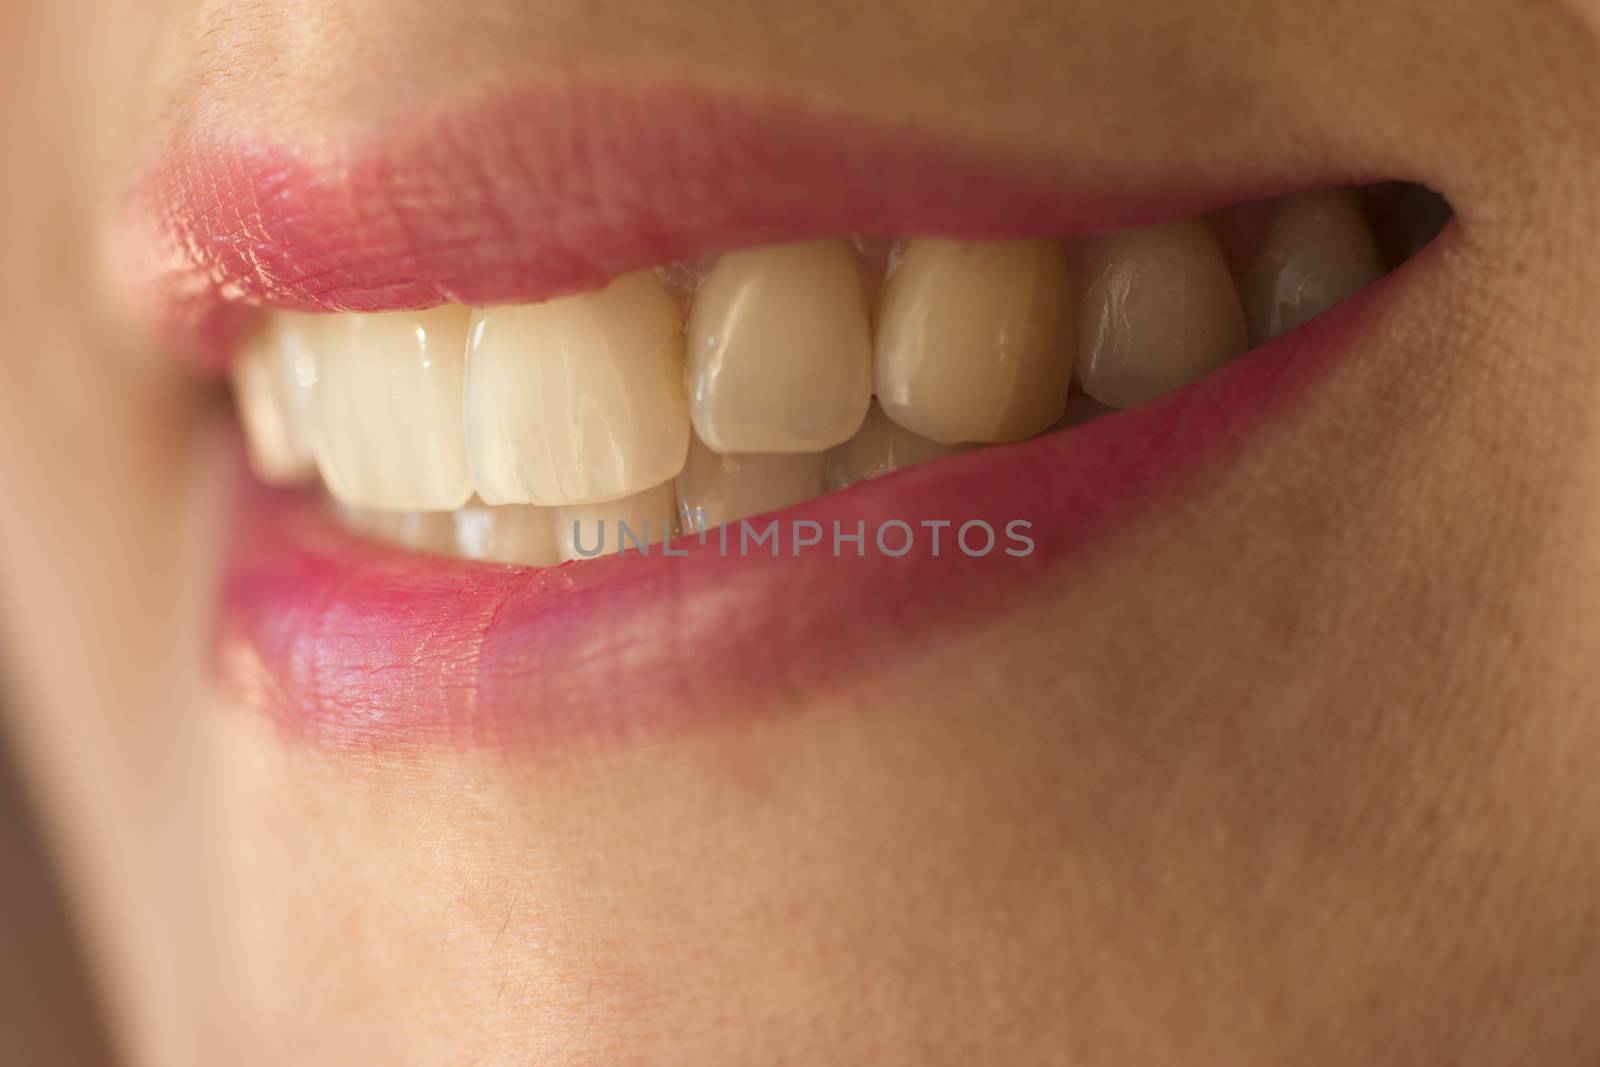 Macro close-up shot of mouth of woman aged 30-35 showing with straight teeth and pink lipstick. 